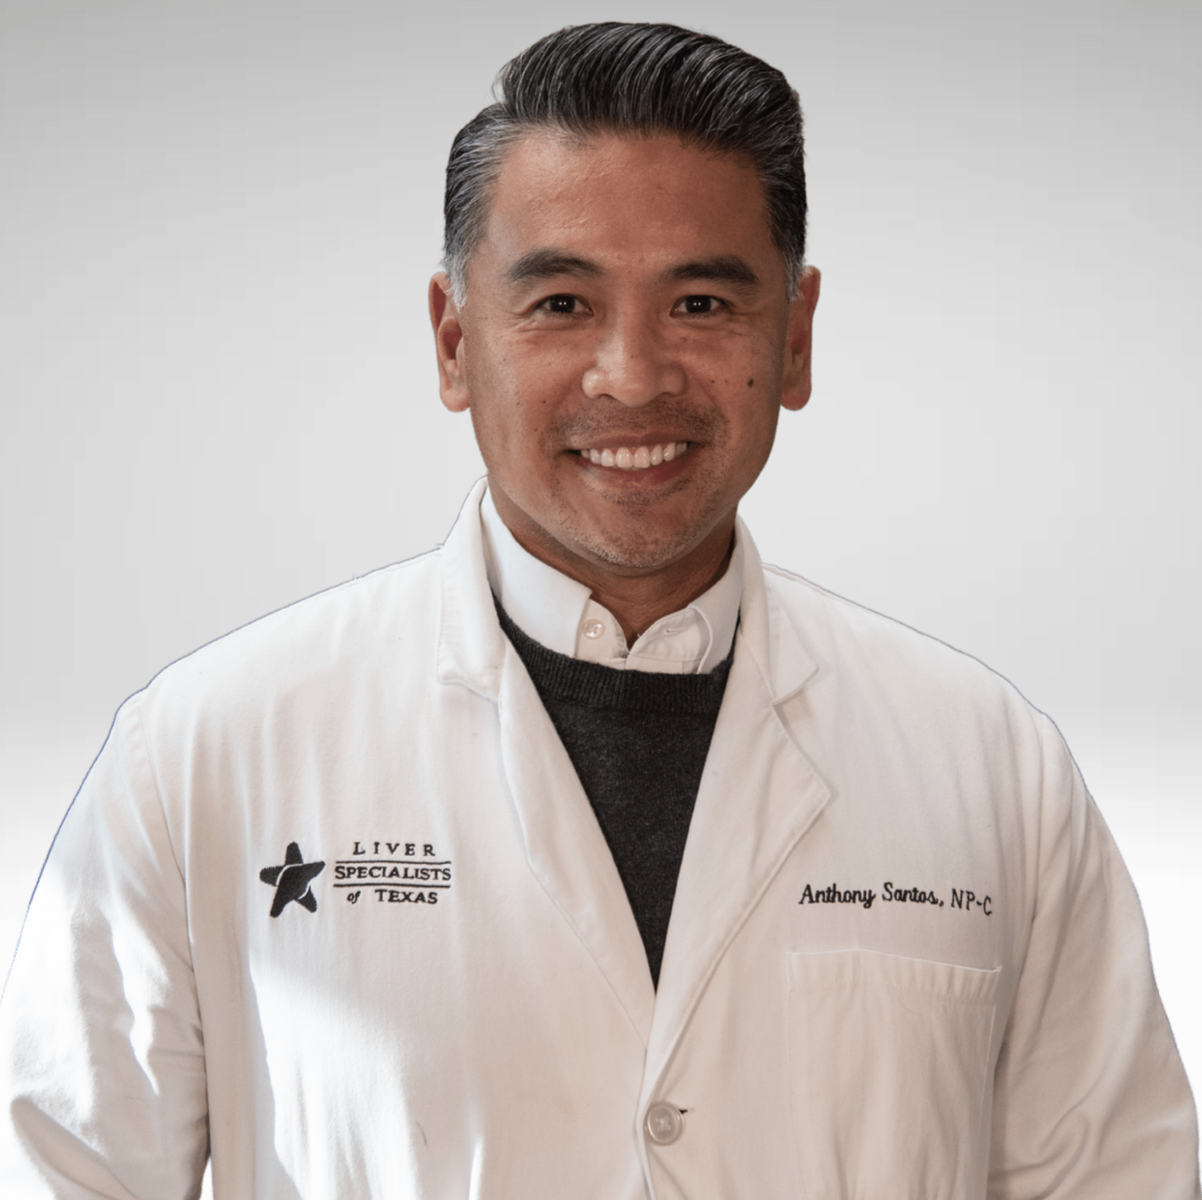 Contact Anthony Santos, RN, NP